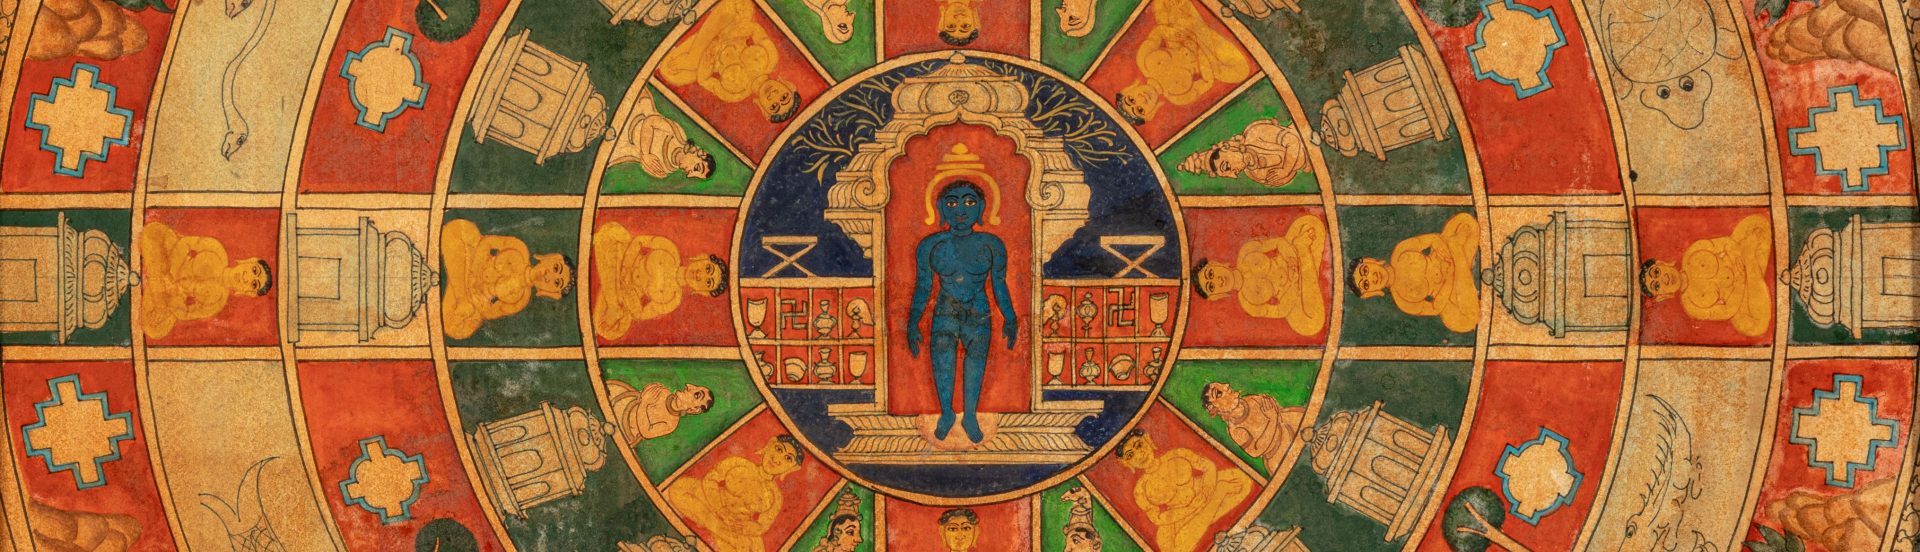 The sculptures, paintings, and manuscripts on view illuminate the visual traditions of Jainism. 
